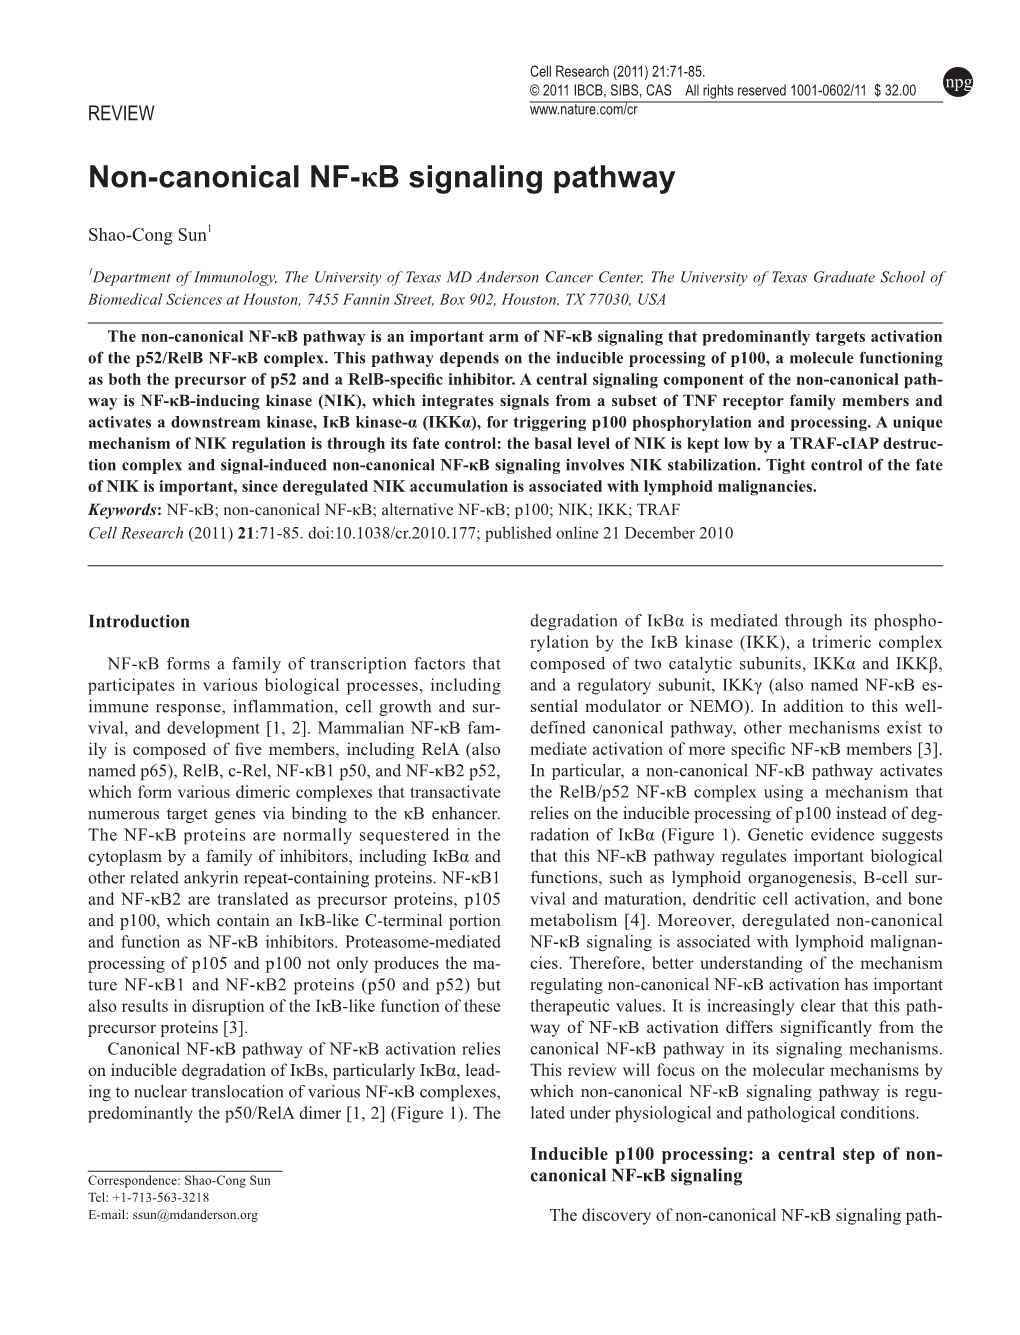 Non-Canonical NF-Κb Signaling Pathway